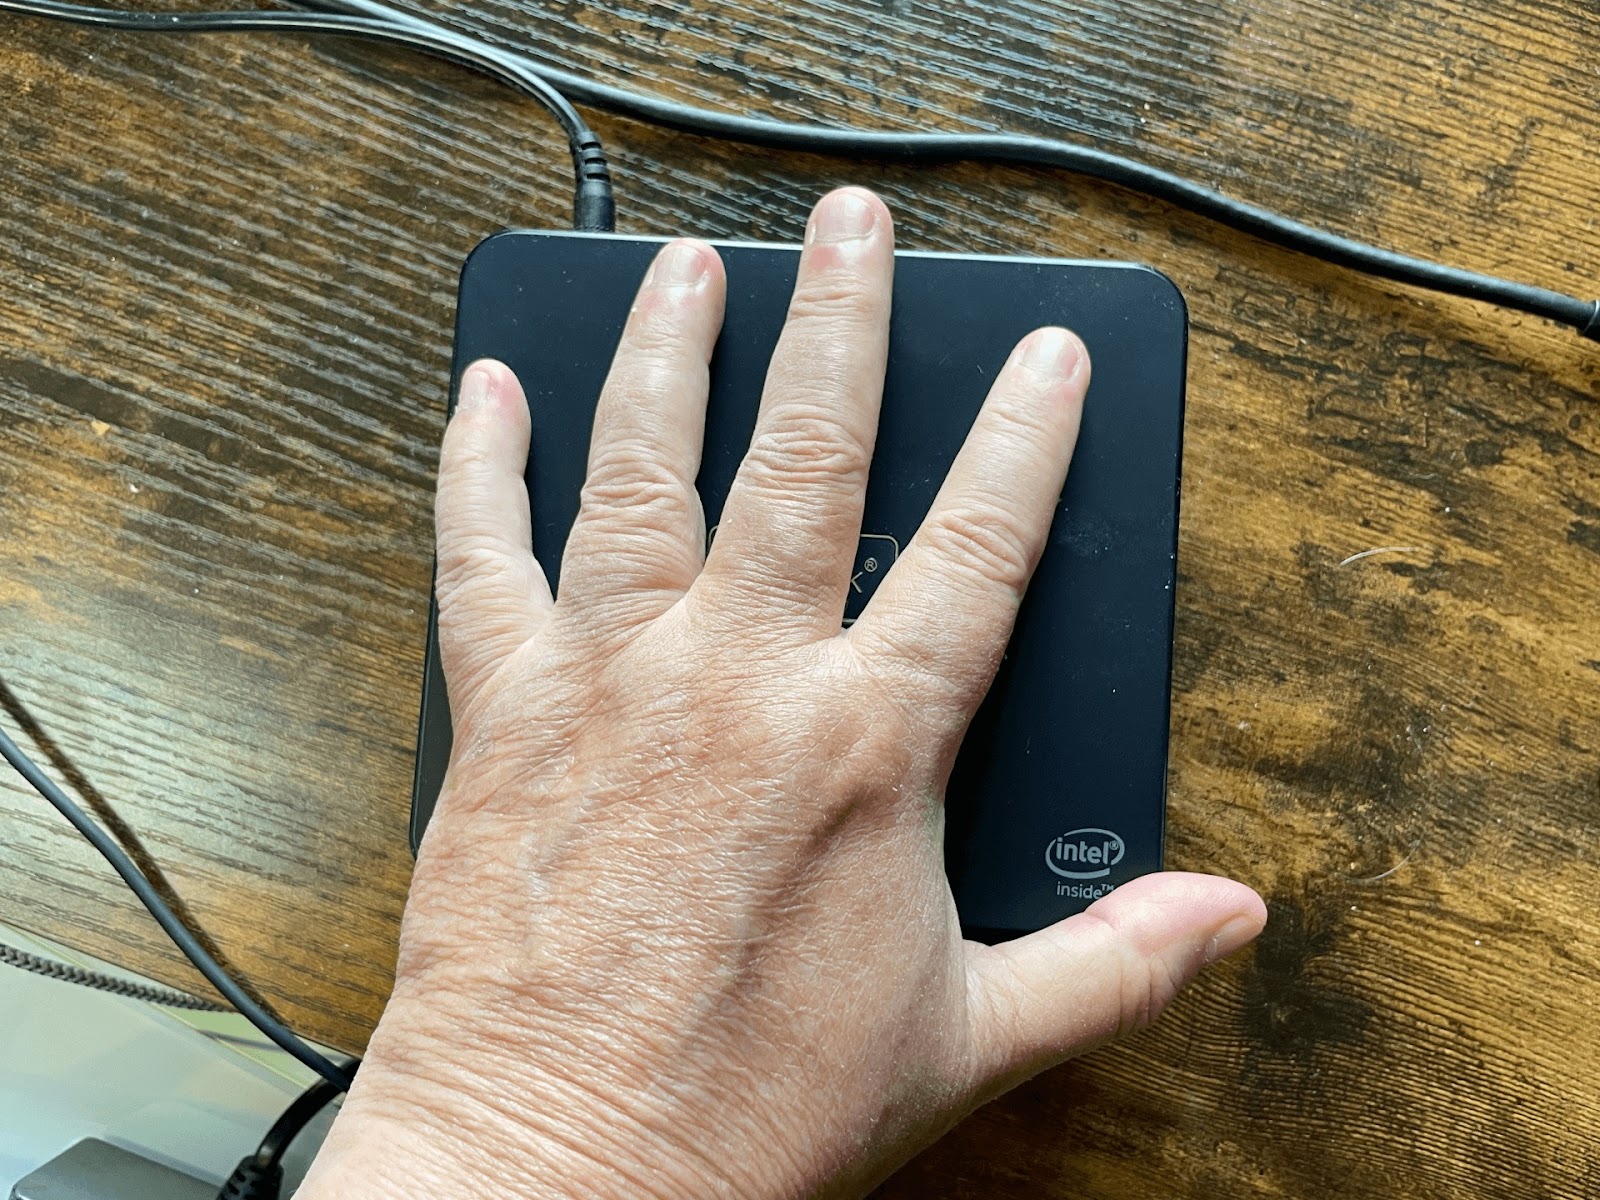 My hand resting on top of a mini pc.